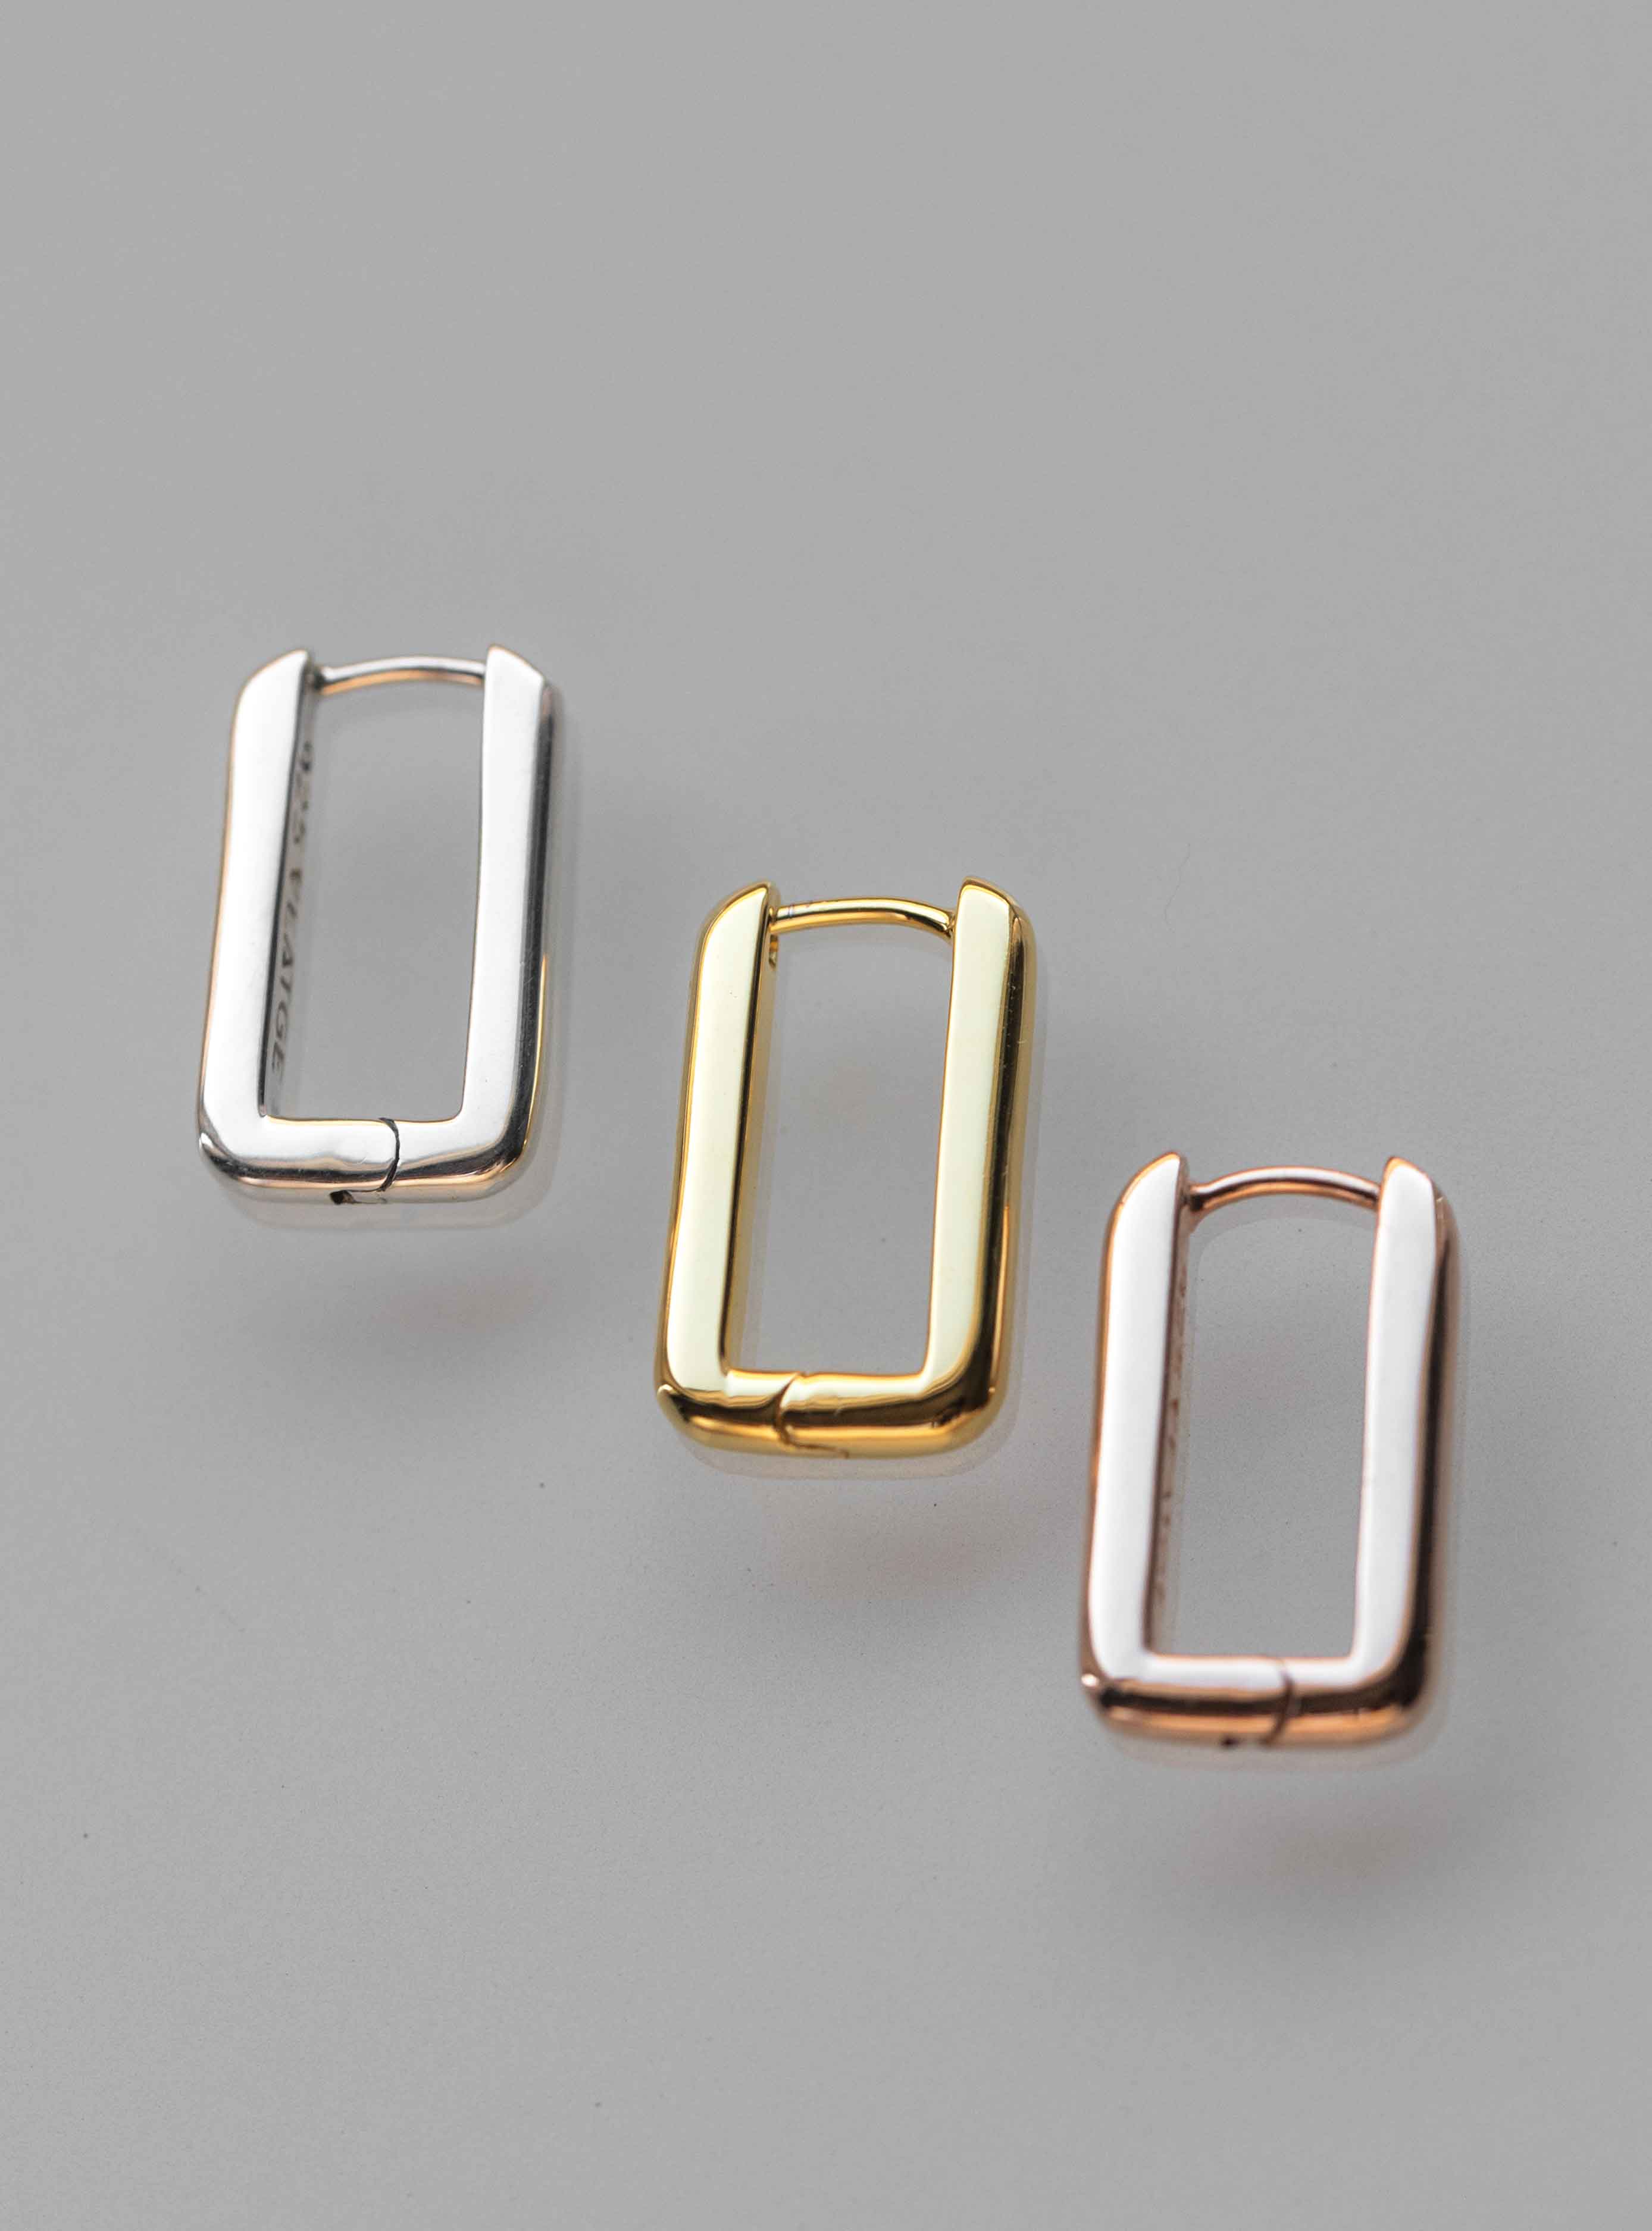 Long Rectangle Earrings From Recycled Plastic Minimal, Lightweight,  Colourful and Sustainable Medical Grade Sterling Silver & Gold Hoops 